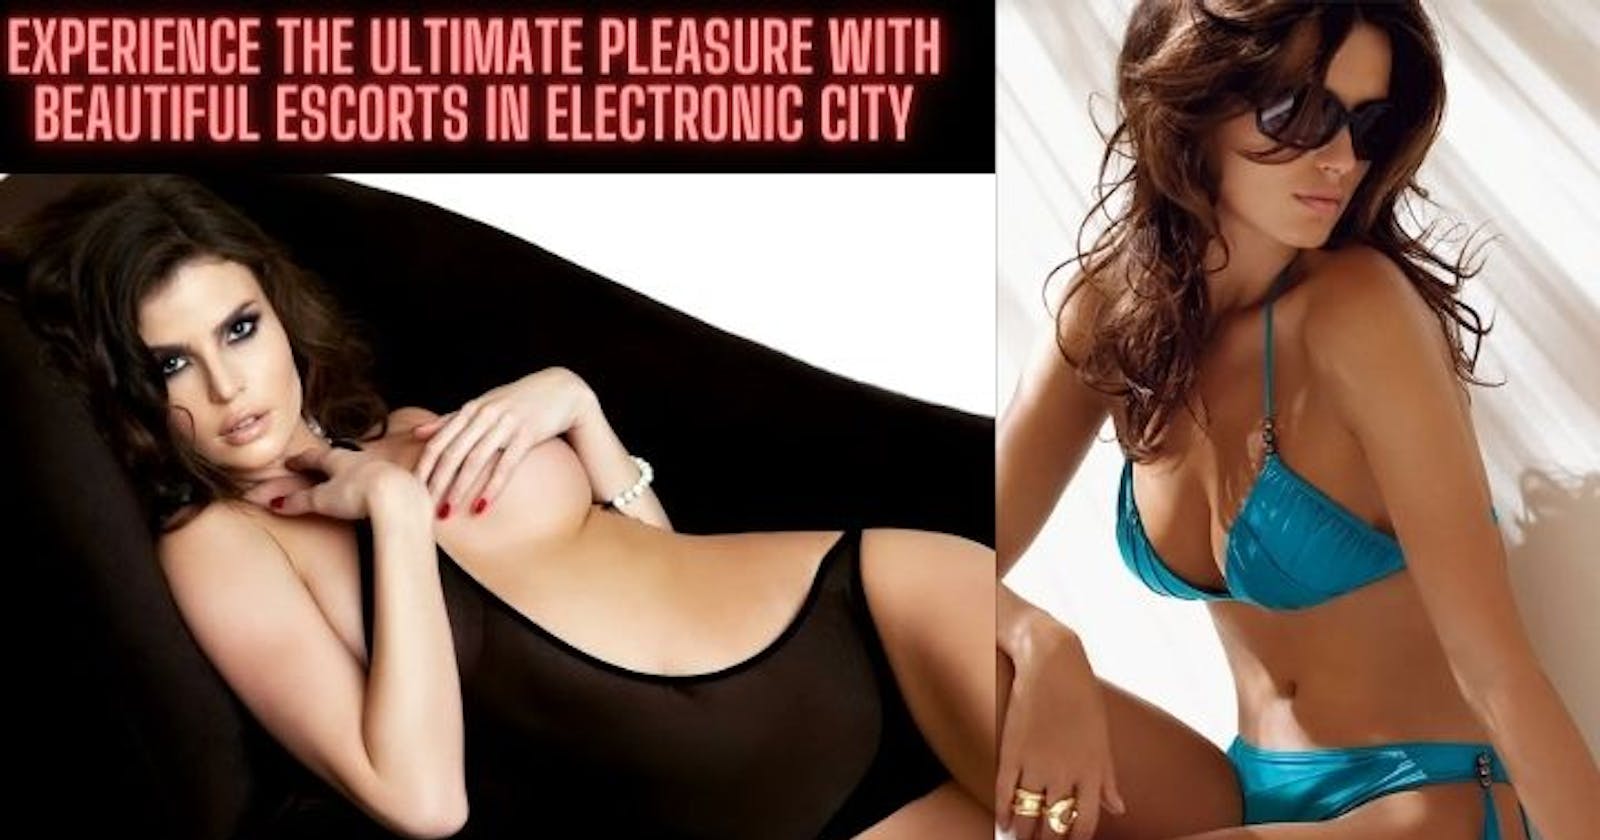 Experience the Ultimate Pleasure with Beautiful Escorts in Electronic City